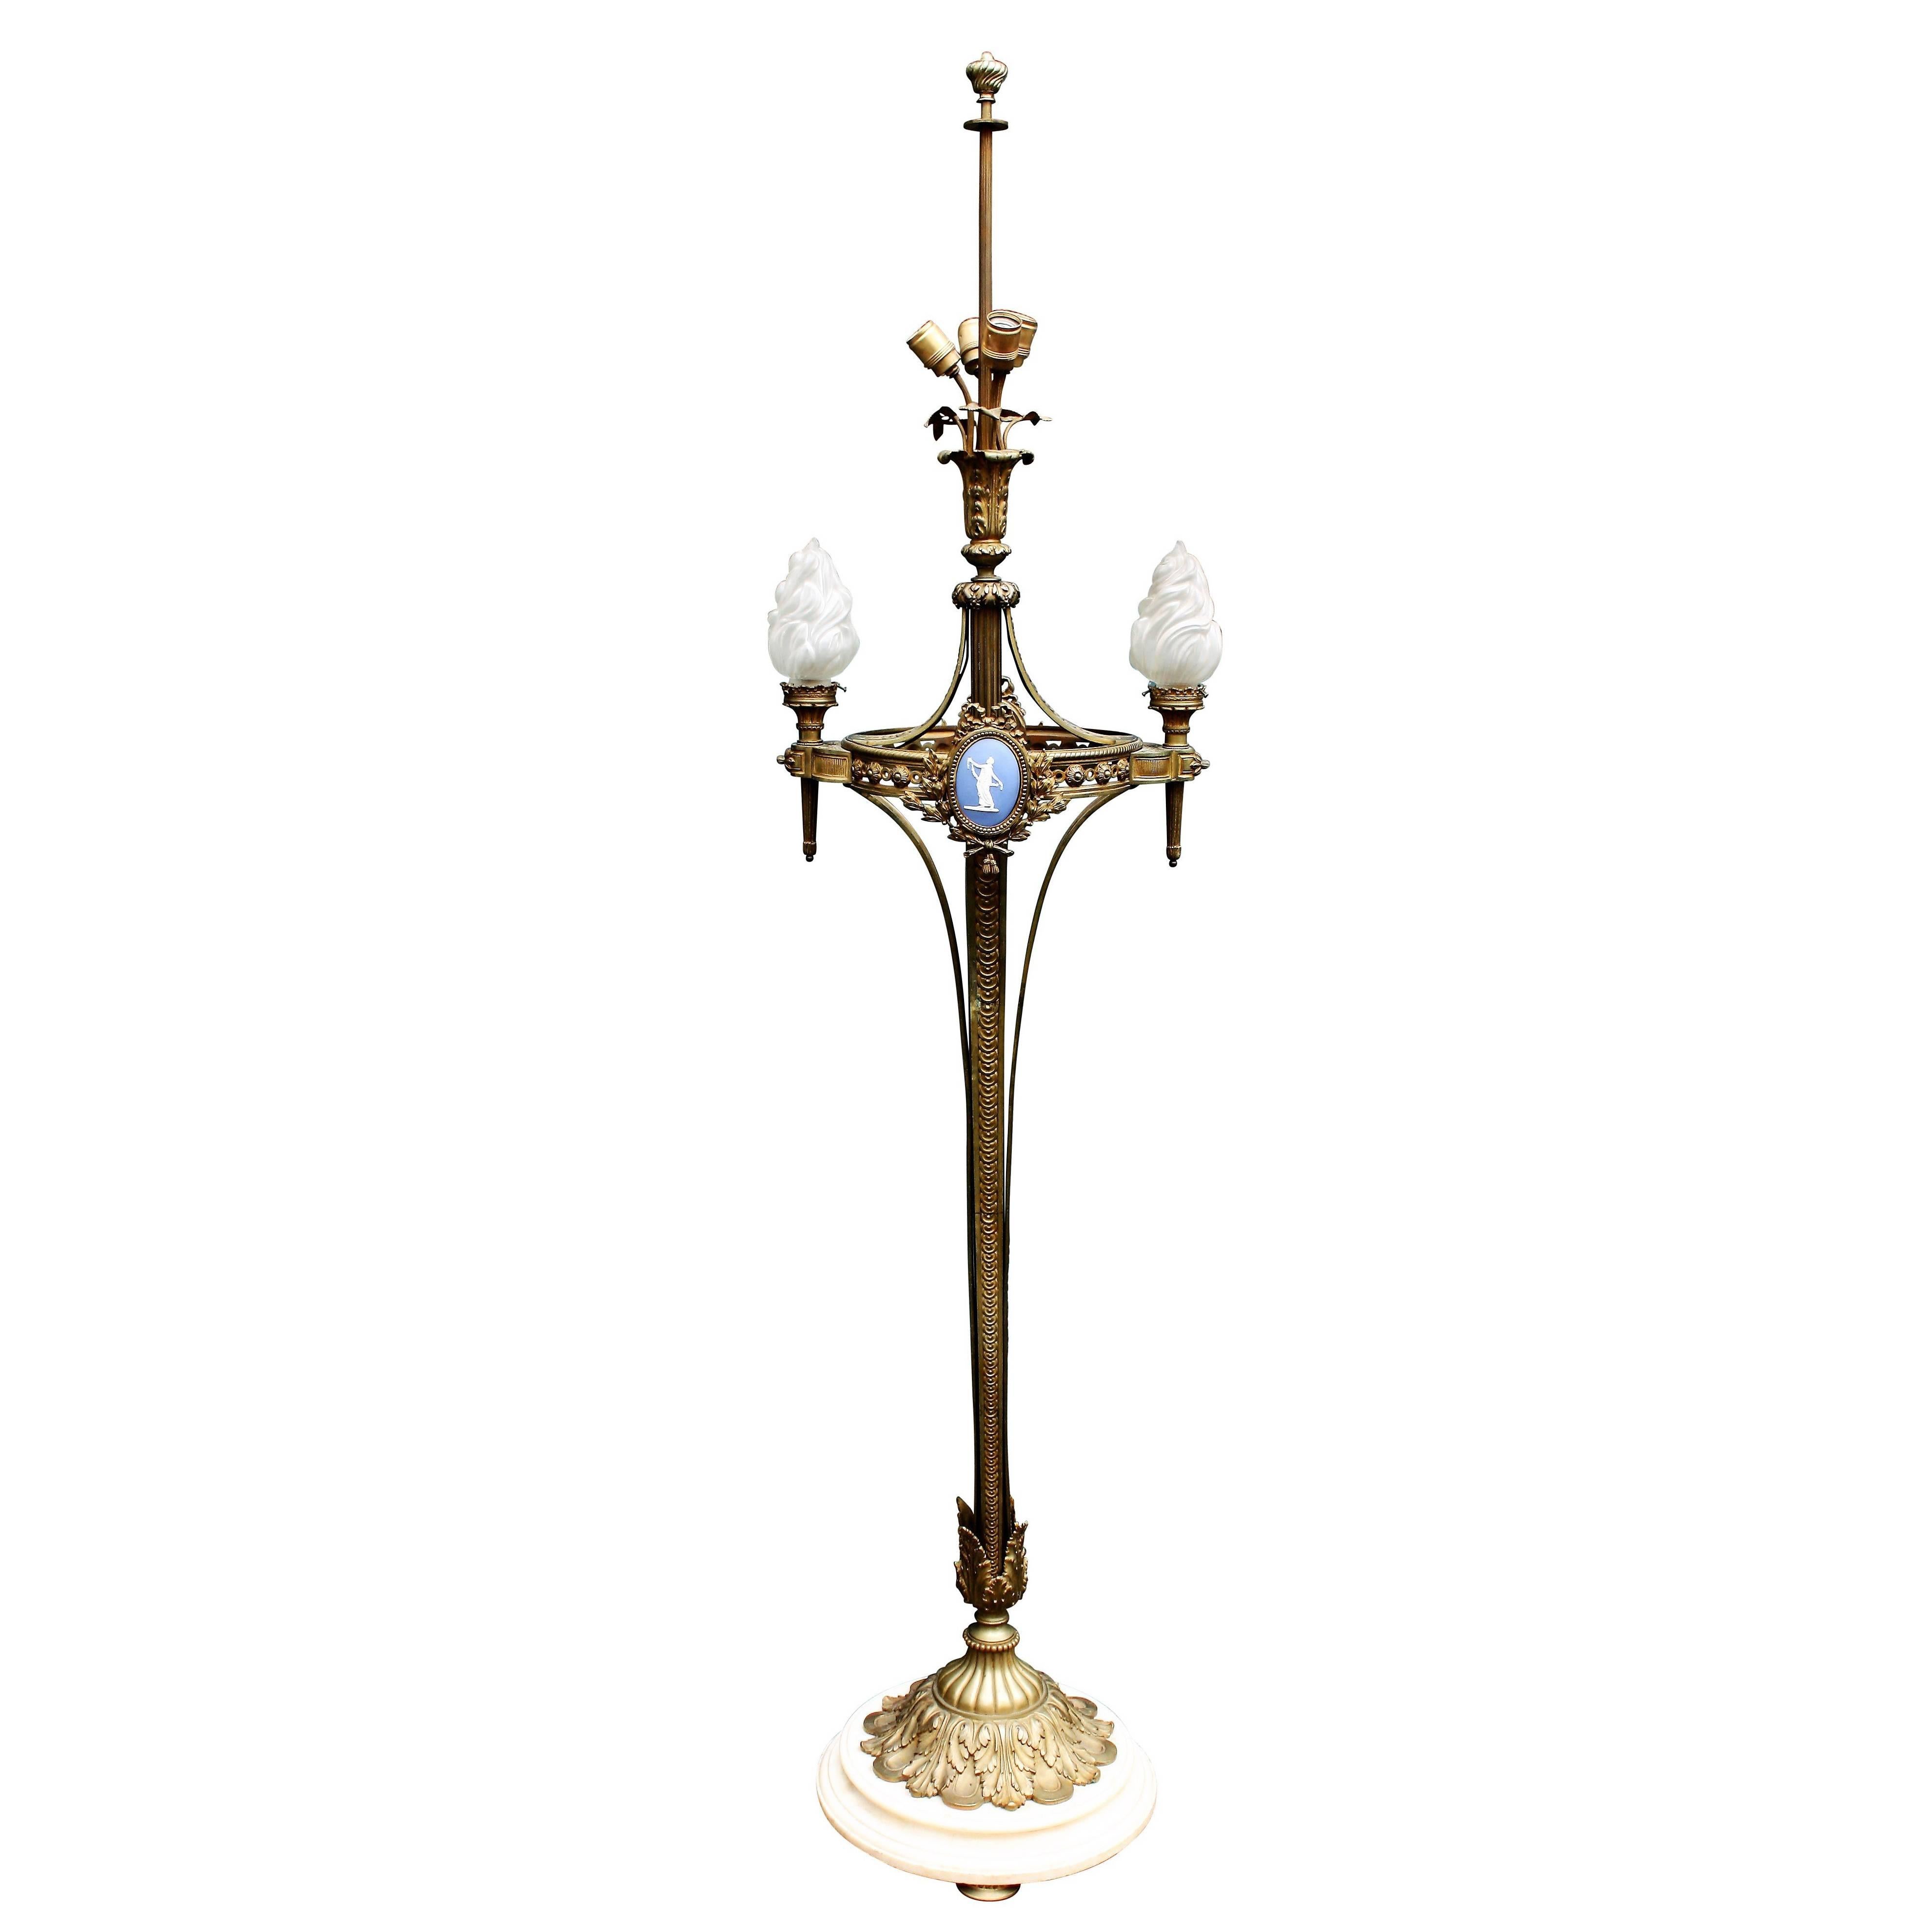 Monumental Floor Lamp, Torchere, Alabaster and Bronze, France, circa 1900s